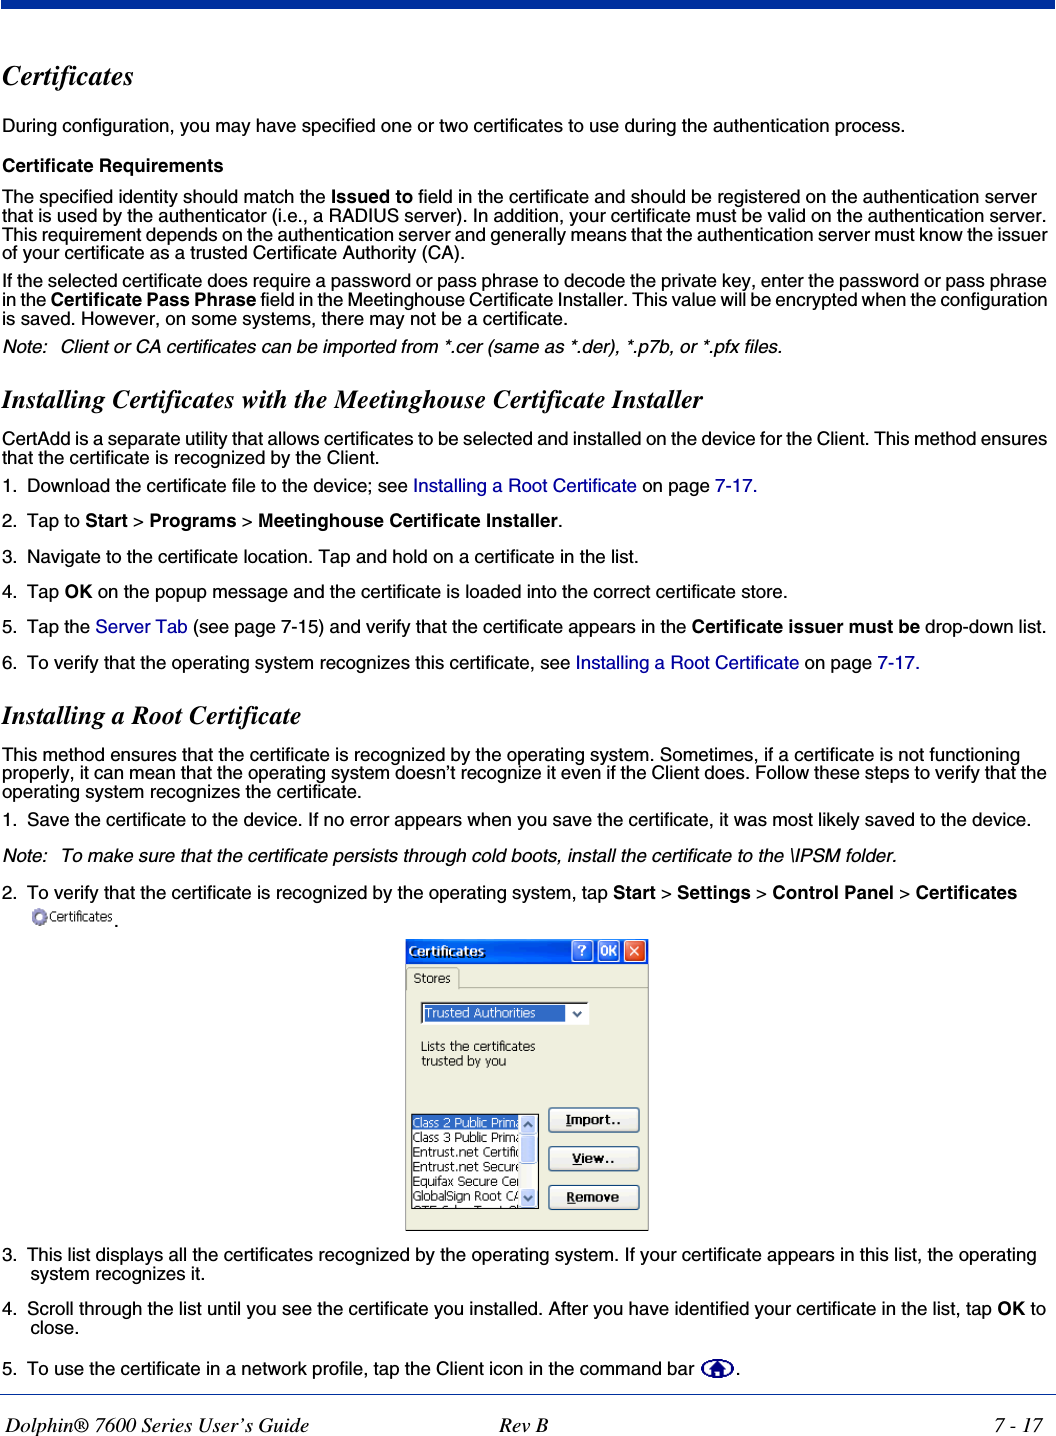 Dolphin® 7600 Series User’s Guide Rev B 7 - 17Certificates During configuration, you may have specified one or two certificates to use during the authentication process. Certificate Requirements The specified identity should match the Issued to field in the certificate and should be registered on the authentication server that is used by the authenticator (i.e., a RADIUS server). In addition, your certificate must be valid on the authentication server. This requirement depends on the authentication server and generally means that the authentication server must know the issuer of your certificate as a trusted Certificate Authority (CA). If the selected certificate does require a password or pass phrase to decode the private key, enter the password or pass phrase in the Certificate Pass Phrase field in the Meetinghouse Certificate Installer. This value will be encrypted when the configuration is saved. However, on some systems, there may not be a certificate. Note: Client or CA certificates can be imported from *.cer (same as *.der), *.p7b, or *.pfx files.Installing Certificates with the Meetinghouse Certificate InstallerCertAdd is a separate utility that allows certificates to be selected and installed on the device for the Client. This method ensures that the certificate is recognized by the Client.1. Download the certificate file to the device; see Installing a Root Certificate on page 7-17. 2. Tap to Start &gt; Programs &gt; Meetinghouse Certificate Installer.3. Navigate to the certificate location. Tap and hold on a certificate in the list. 4. Tap OK on the popup message and the certificate is loaded into the correct certificate store.5. Tap the Server Tab (see page 7-15) and verify that the certificate appears in the Certificate issuer must be drop-down list. 6. To verify that the operating system recognizes this certificate, see Installing a Root Certificate on page 7-17.Installing a Root CertificateThis method ensures that the certificate is recognized by the operating system. Sometimes, if a certificate is not functioning properly, it can mean that the operating system doesn’t recognize it even if the Client does. Follow these steps to verify that the operating system recognizes the certificate. 1. Save the certificate to the device. If no error appears when you save the certificate, it was most likely saved to the device. Note: To make sure that the certificate persists through cold boots, install the certificate to the \IPSM folder.2. To verify that the certificate is recognized by the operating system, tap Start &gt; Settings &gt; Control Panel &gt; Certificates . 3. This list displays all the certificates recognized by the operating system. If your certificate appears in this list, the operating system recognizes it. 4. Scroll through the list until you see the certificate you installed. After you have identified your certificate in the list, tap OK to close.5. To use the certificate in a network profile, tap the Client icon in the command bar  .